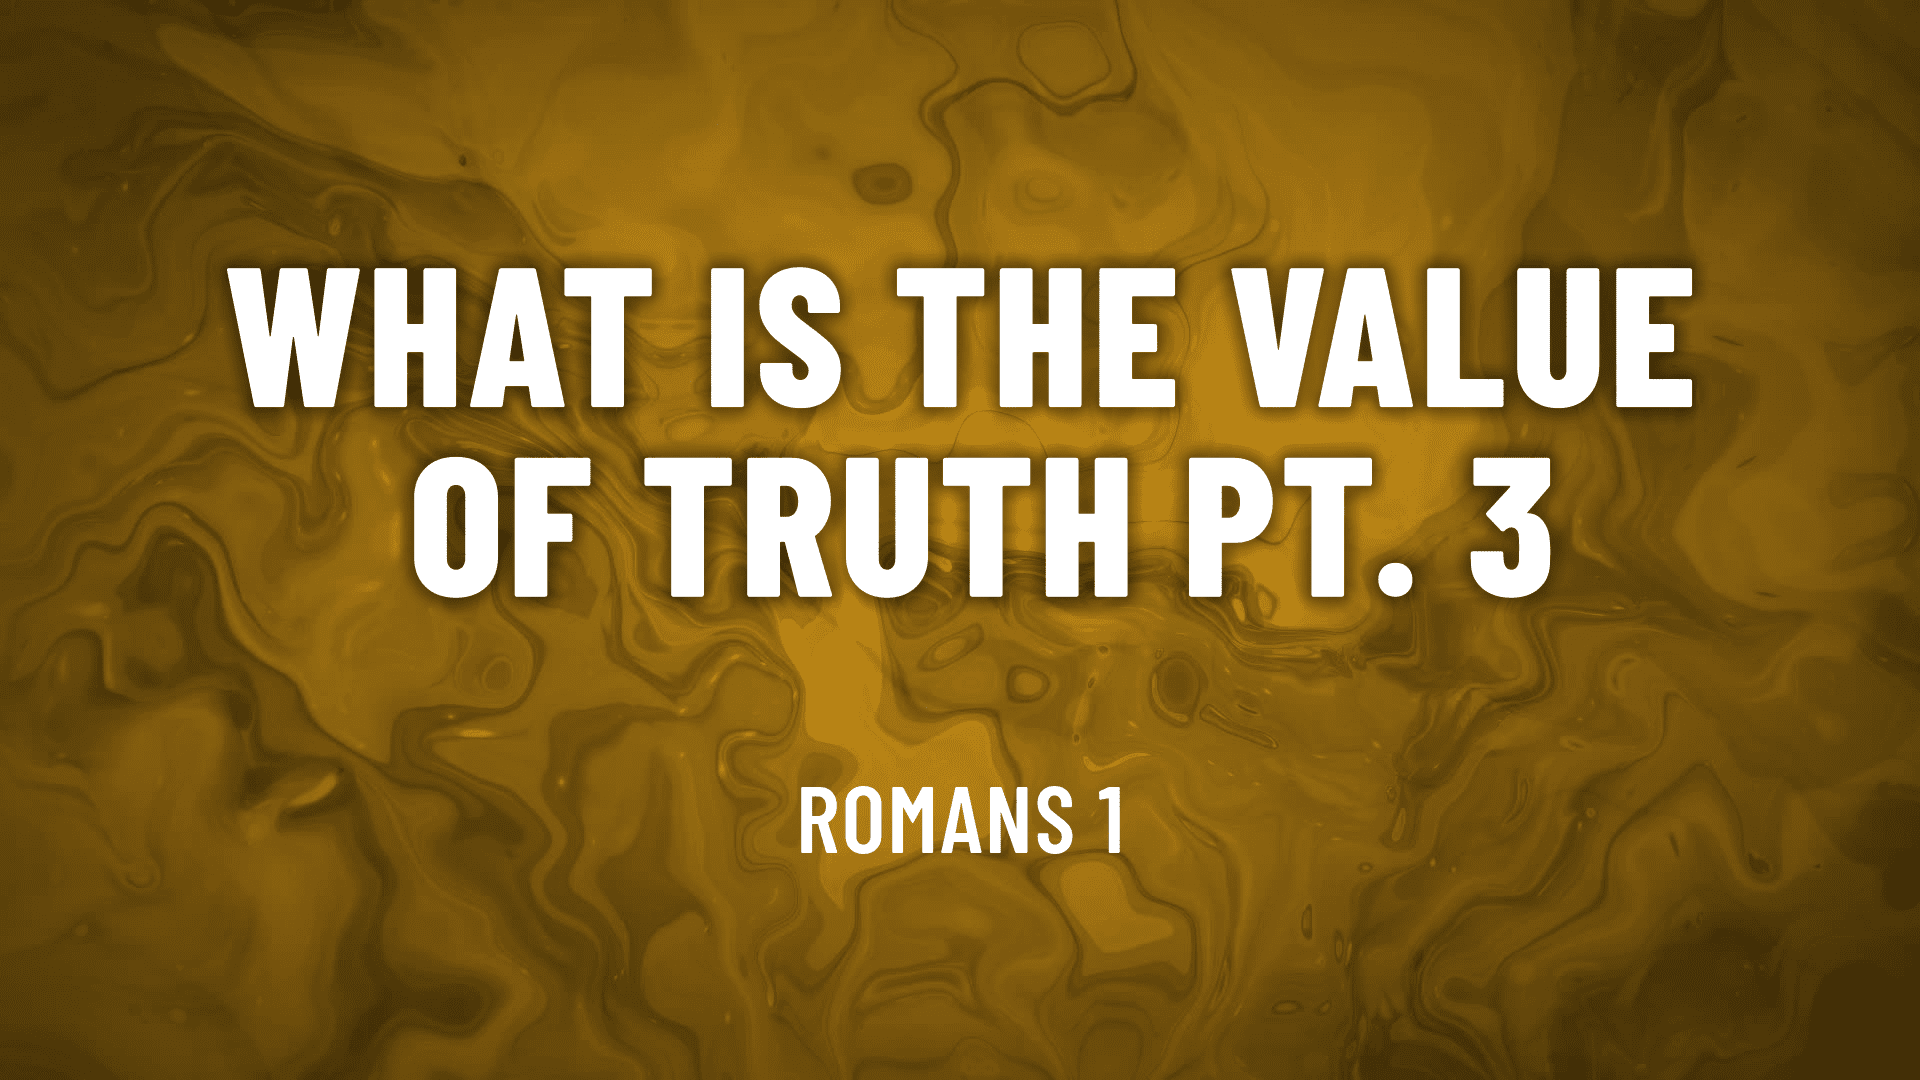 What is the value of truth pt.3